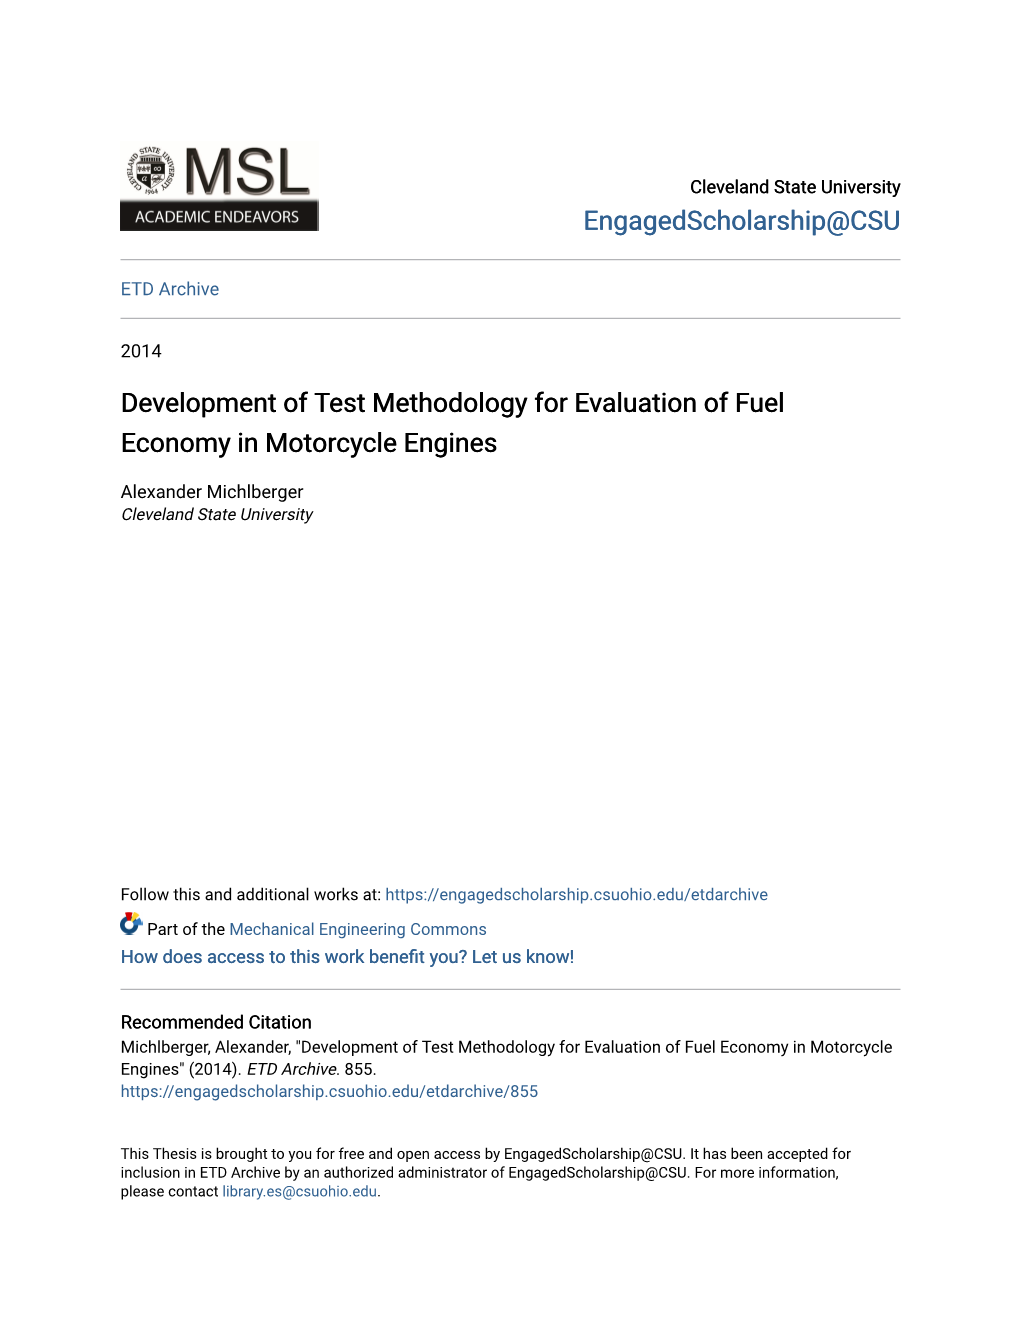 Development of Test Methodology for Evaluation of Fuel Economy in Motorcycle Engines